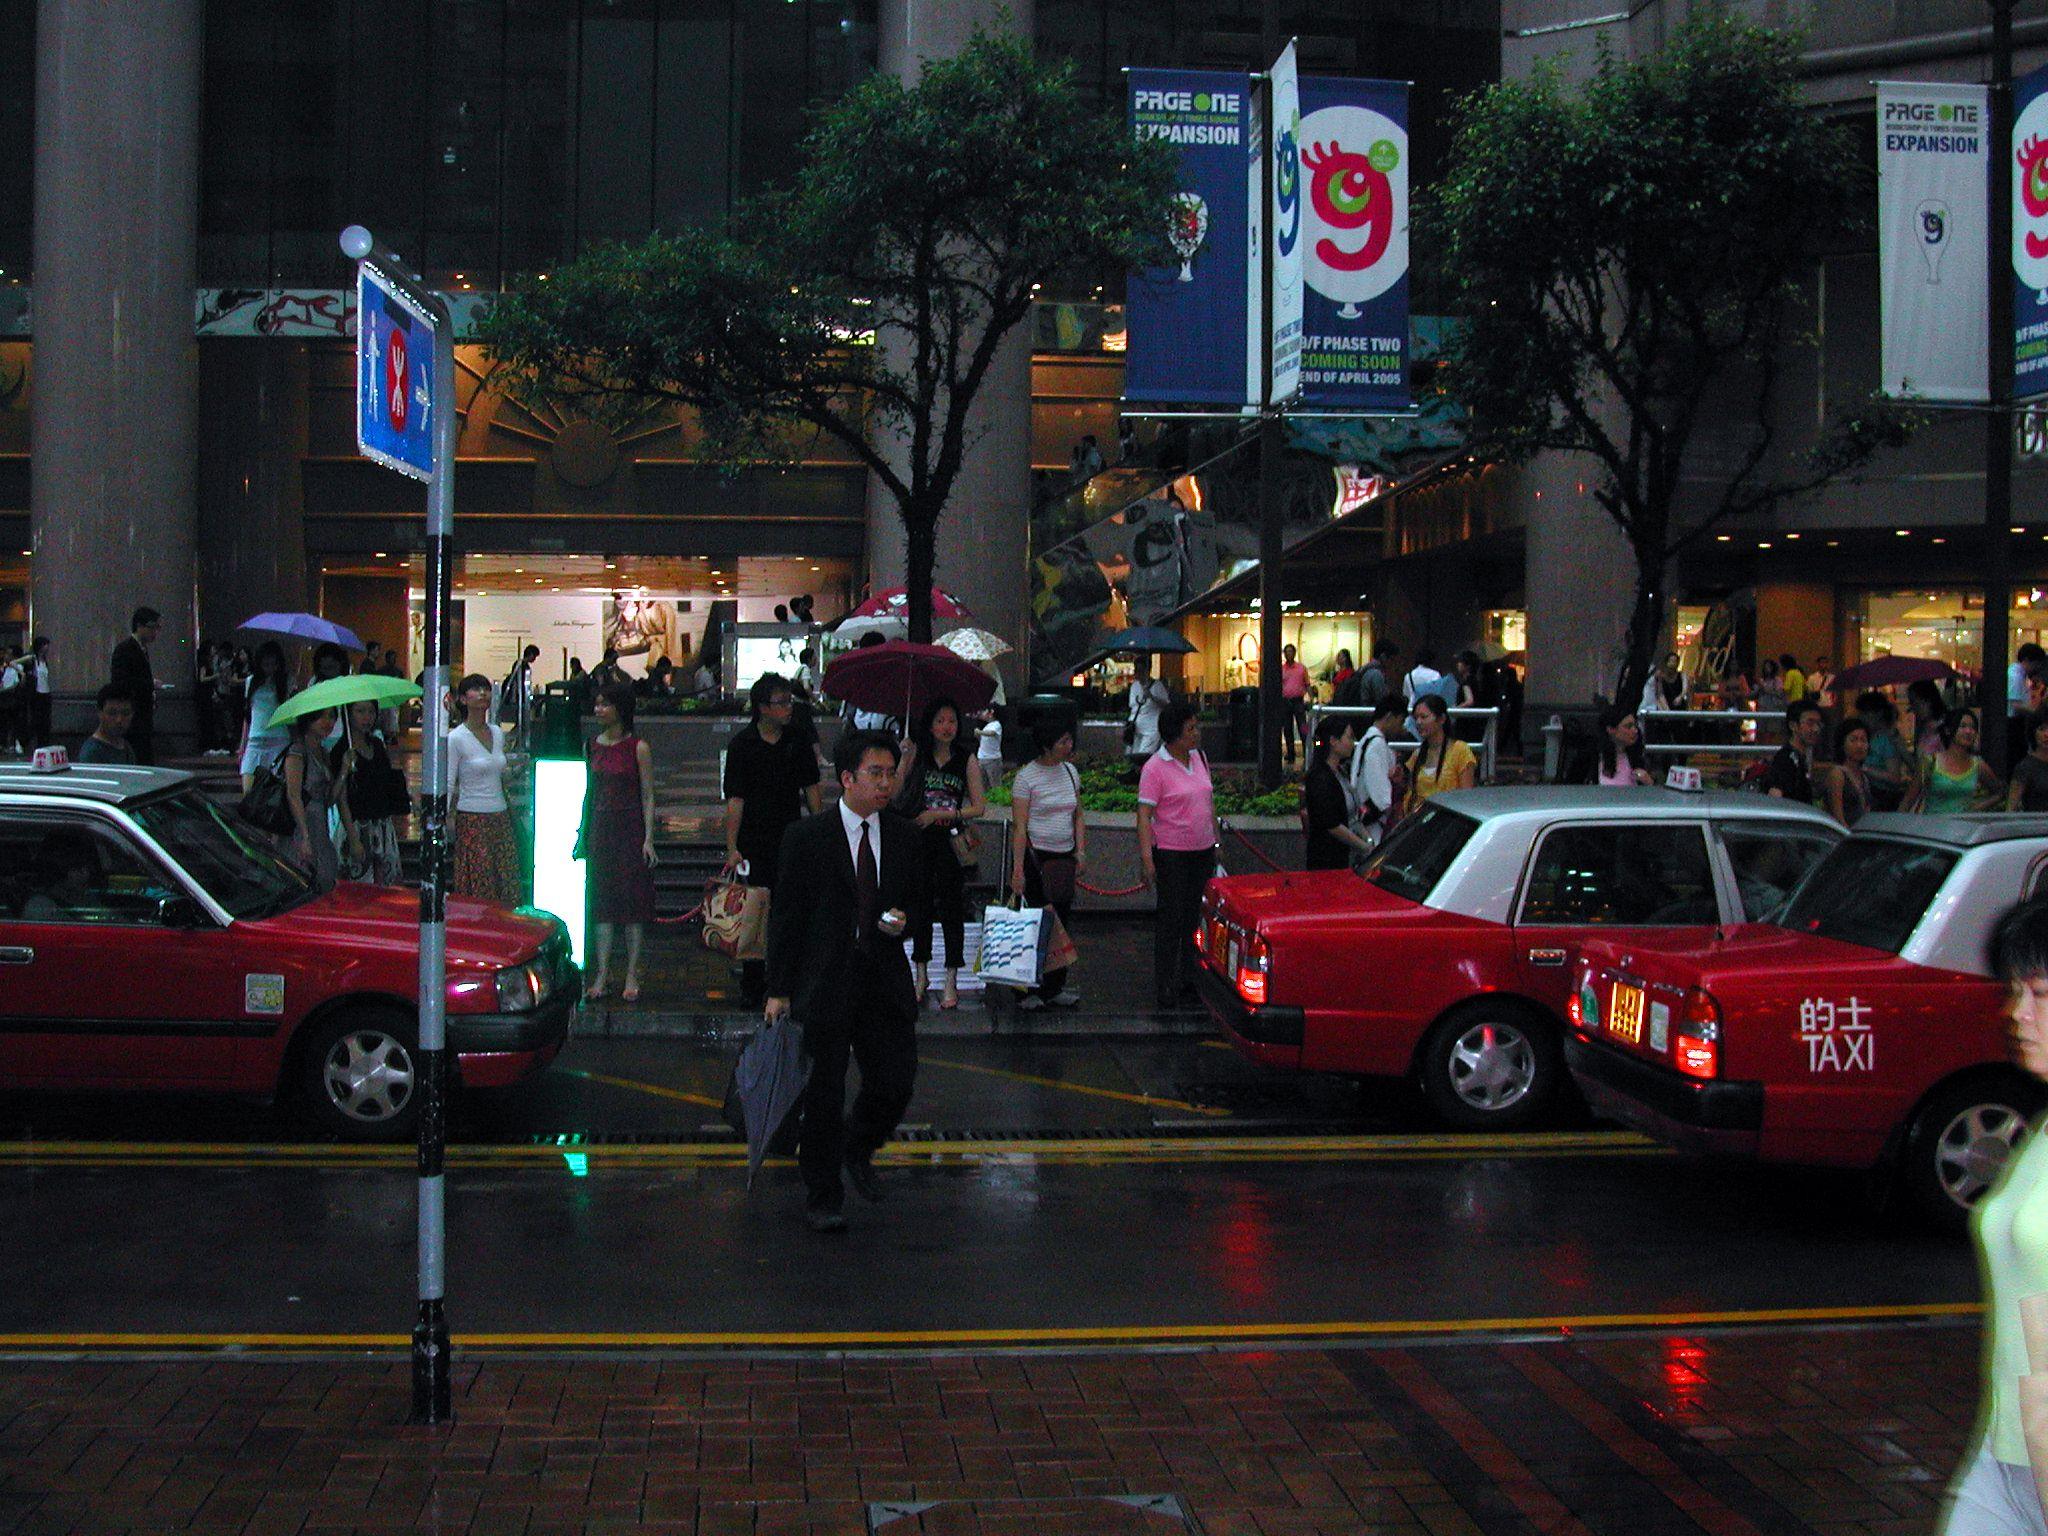 Time square HK taxi rank in